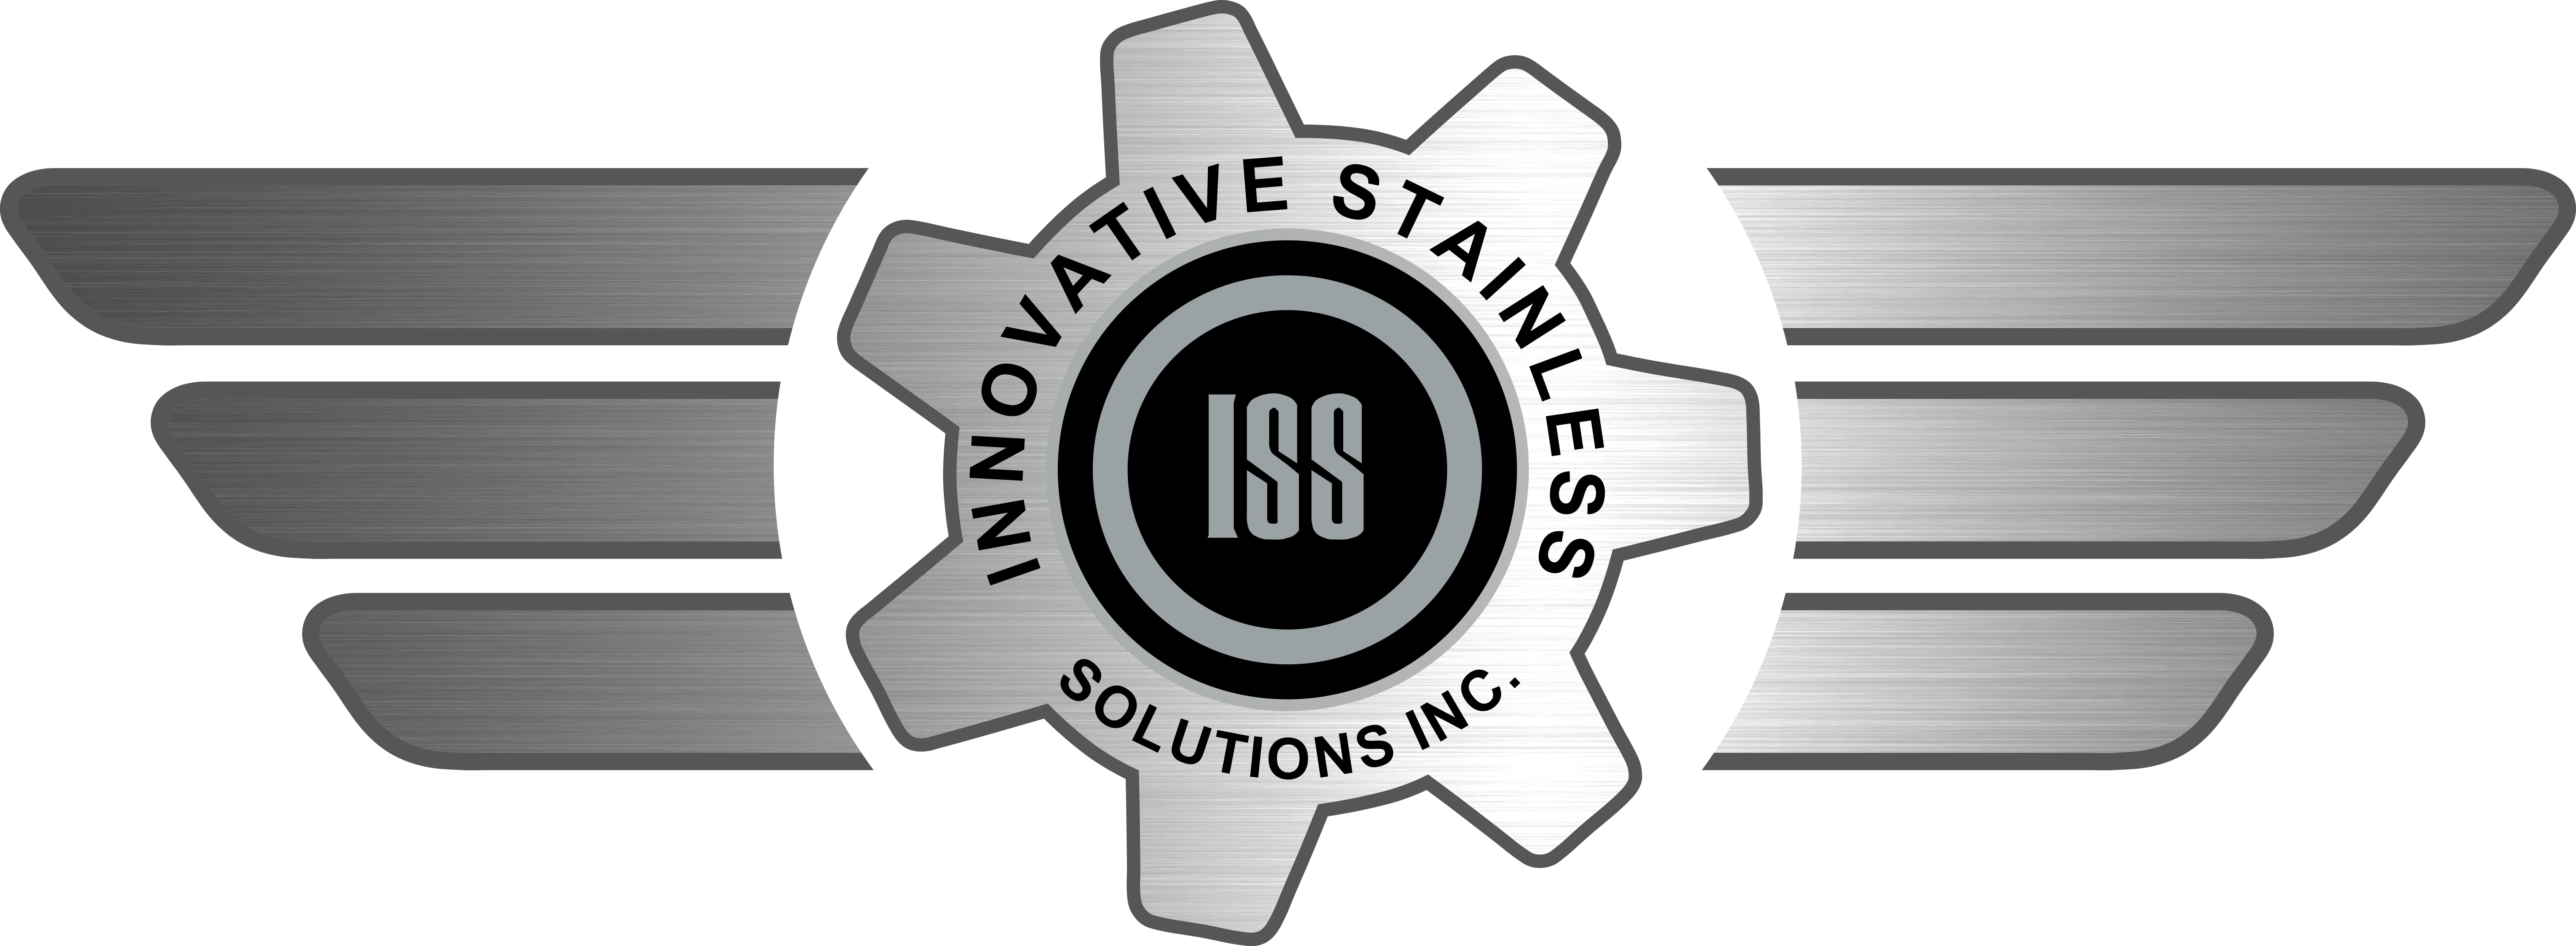 Innovative Stainless Solutions Inc.